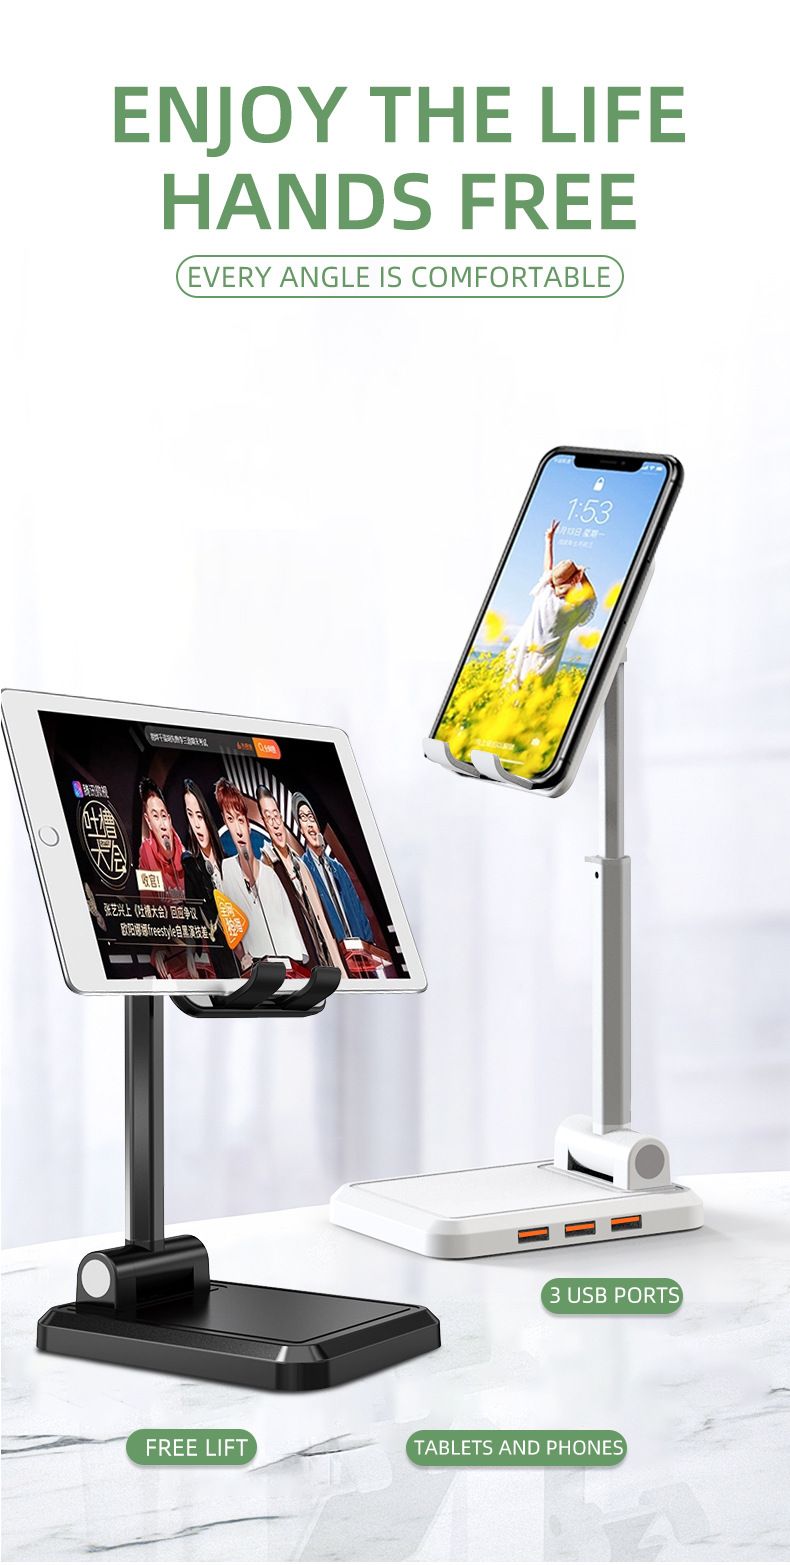 IPAKY-Desktop-3-Port-USB-Charger-Foldable-Height-Adjustable-Phone-Holder-Tablet-Stand-For-40-129-Inc-1719831